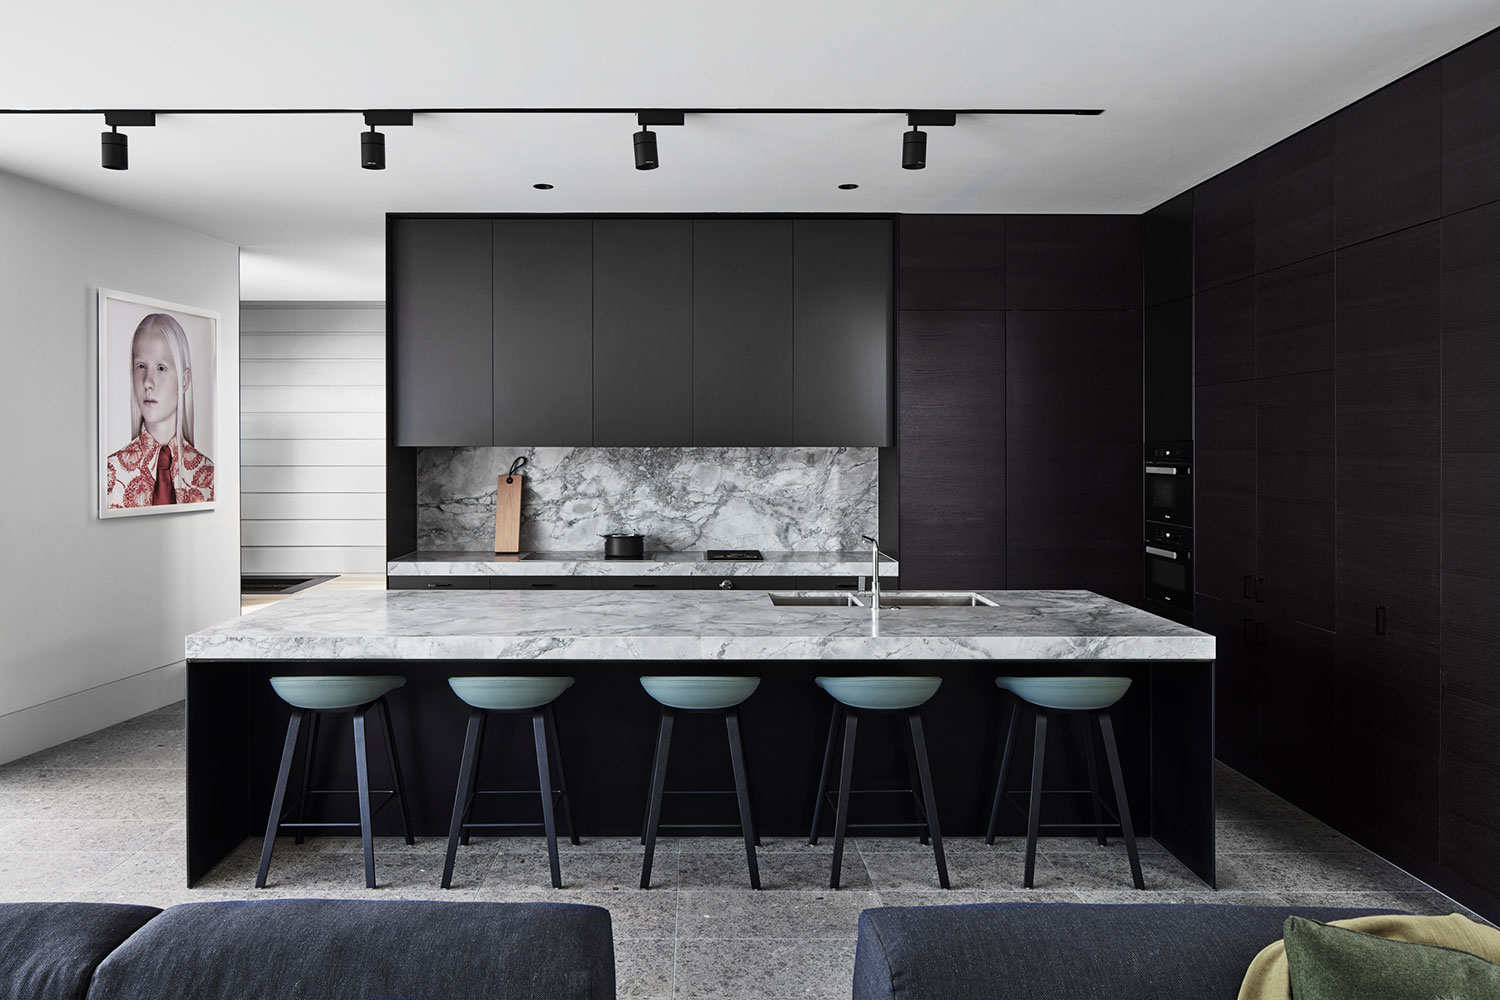 New open plan kitchen with black steel detailing